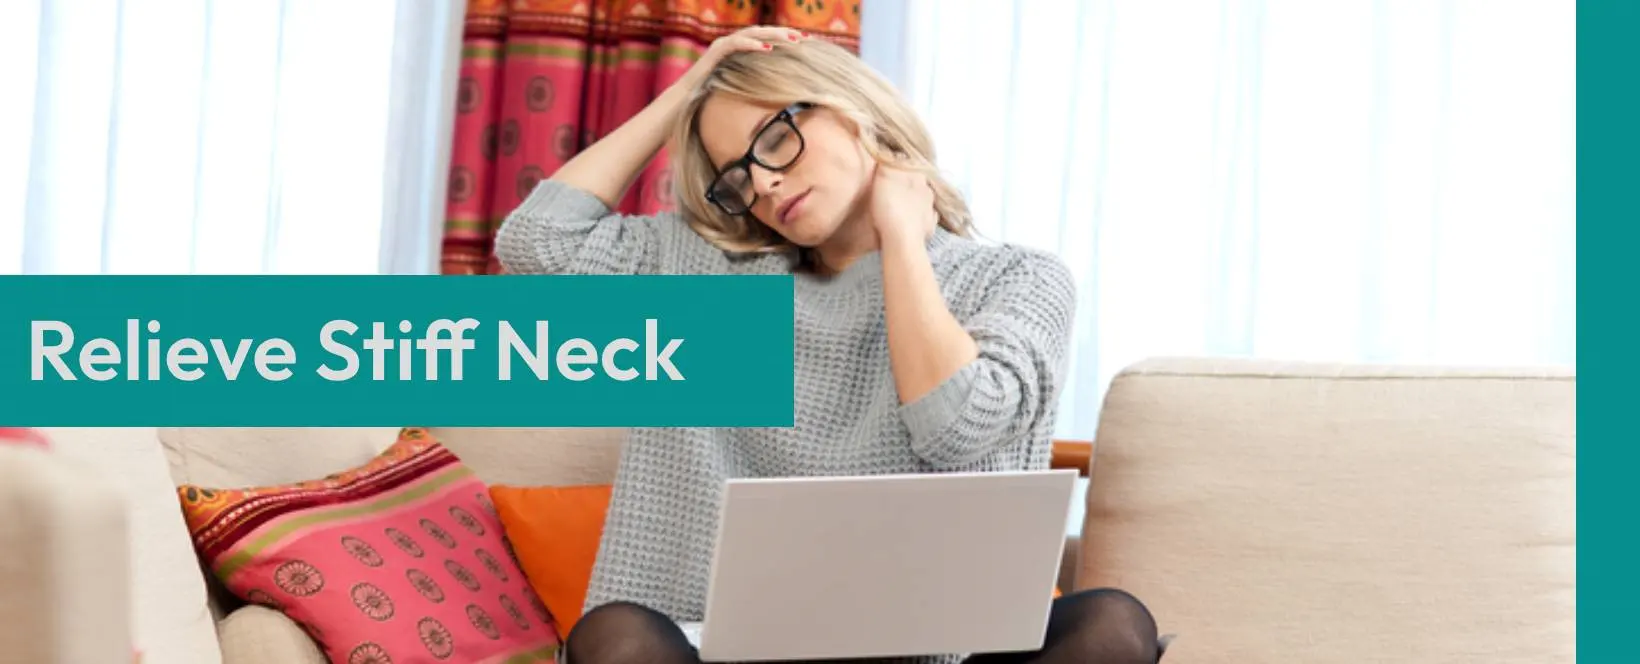 Are You Searching Methods To Cure Neck Pain?